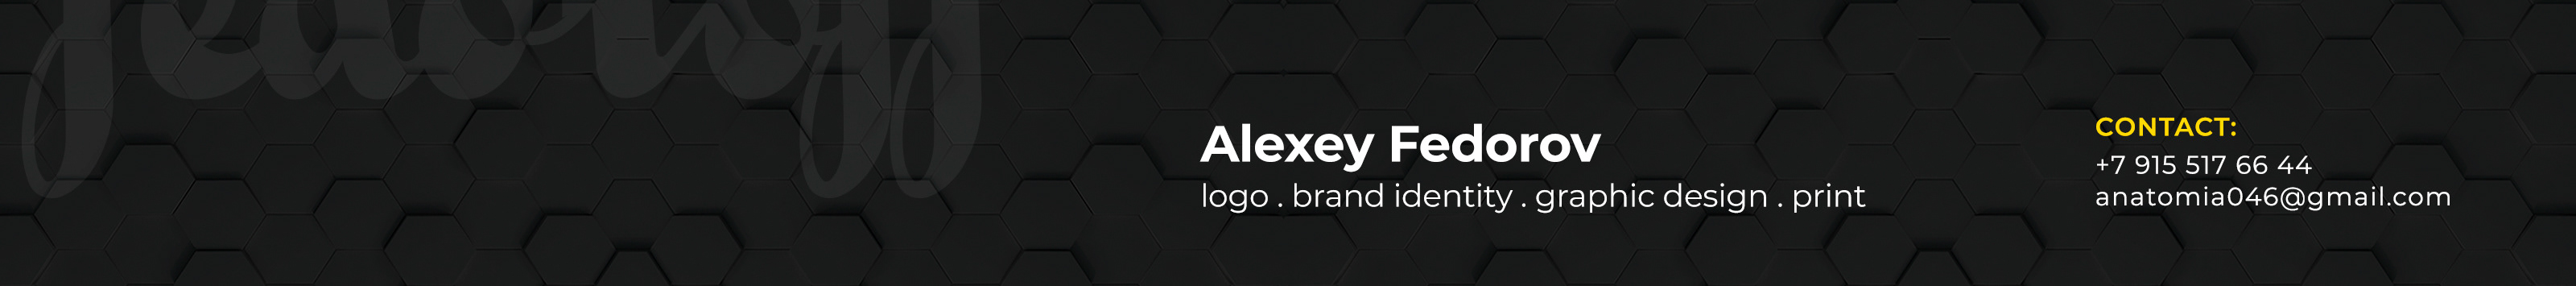 ALEXEY FEDOROV's profile banner